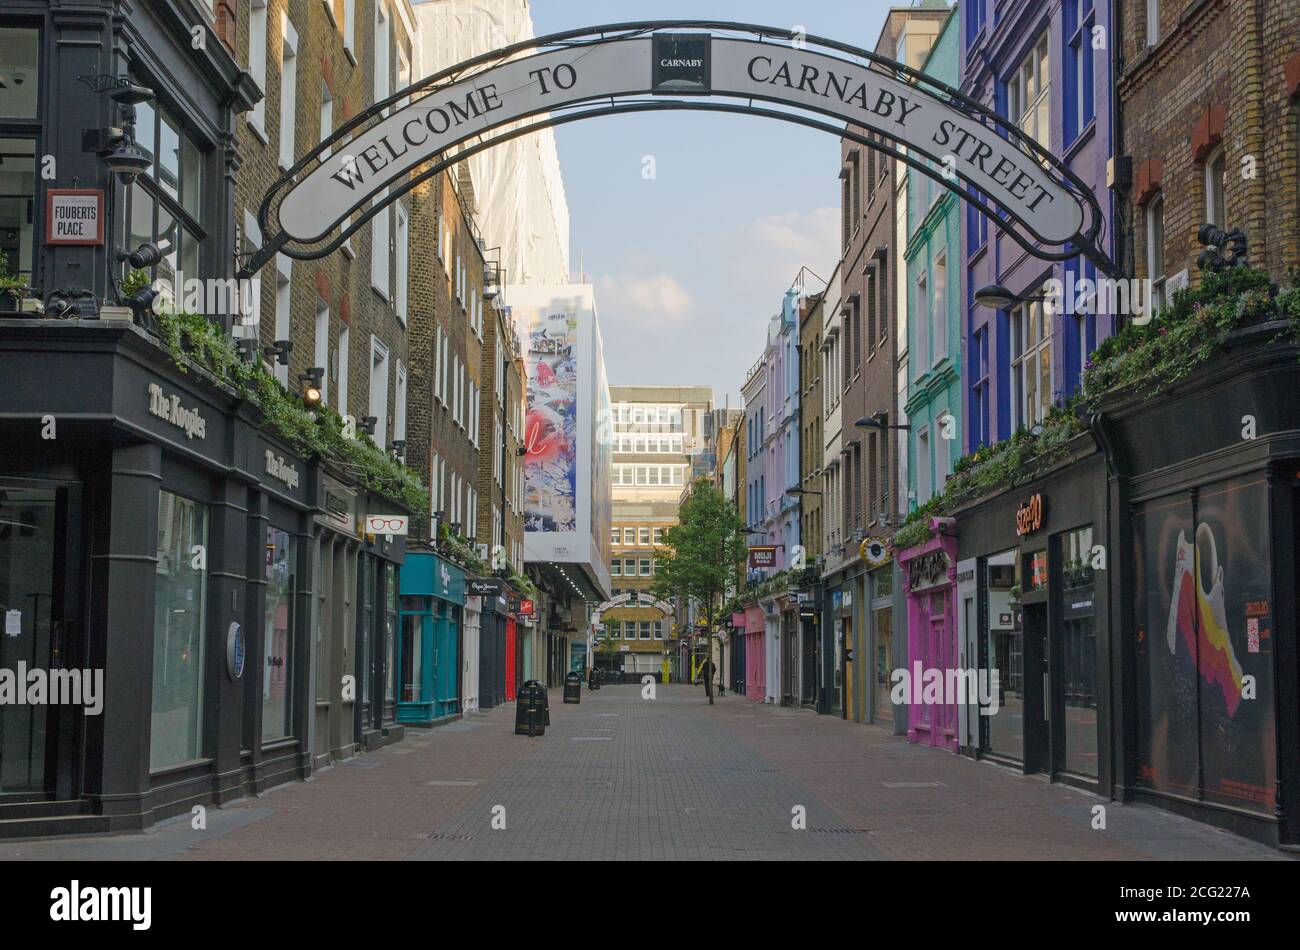 London, UK - April 24, 2020: Carnaby Street, a famous shopping area in central London with a variety of fashionable and trendy shops. Stock Photo